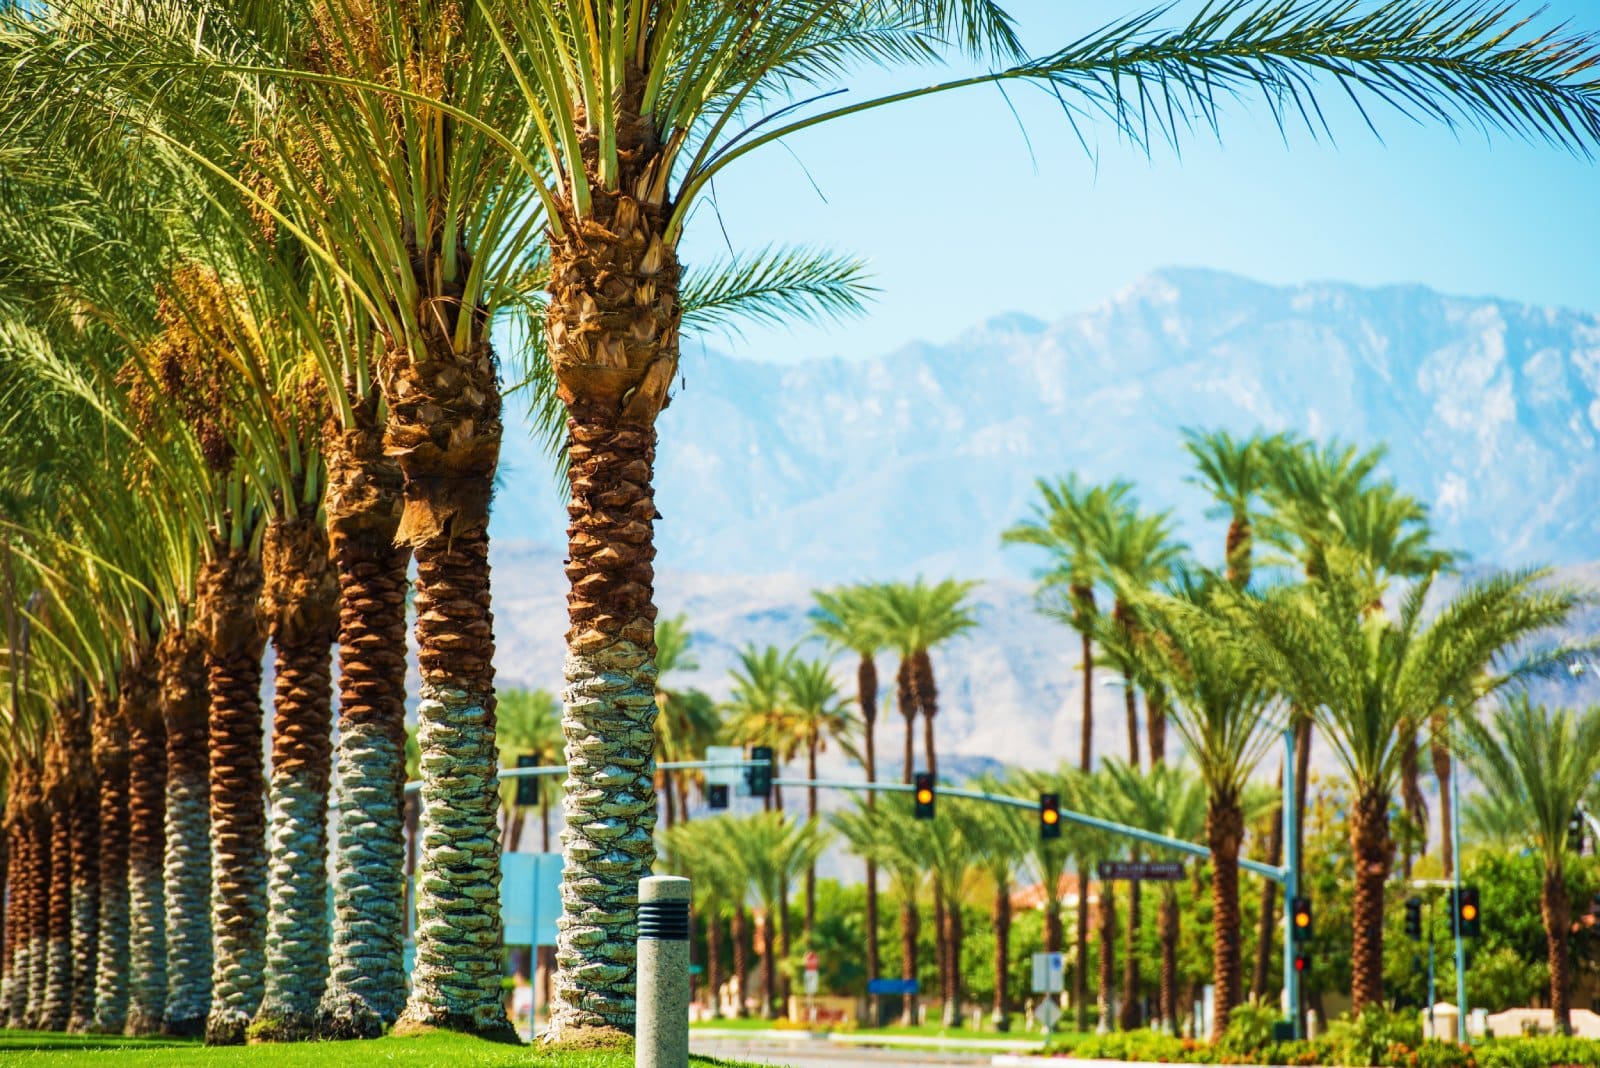 <p><span>Indulge in the retro-chic vibe of Palm Springs, with its mid-century modern architecture, desert landscapes, and Hollywood glamour that evoke the ambiance of the French Riviera and Moroccan oases.</span></p>